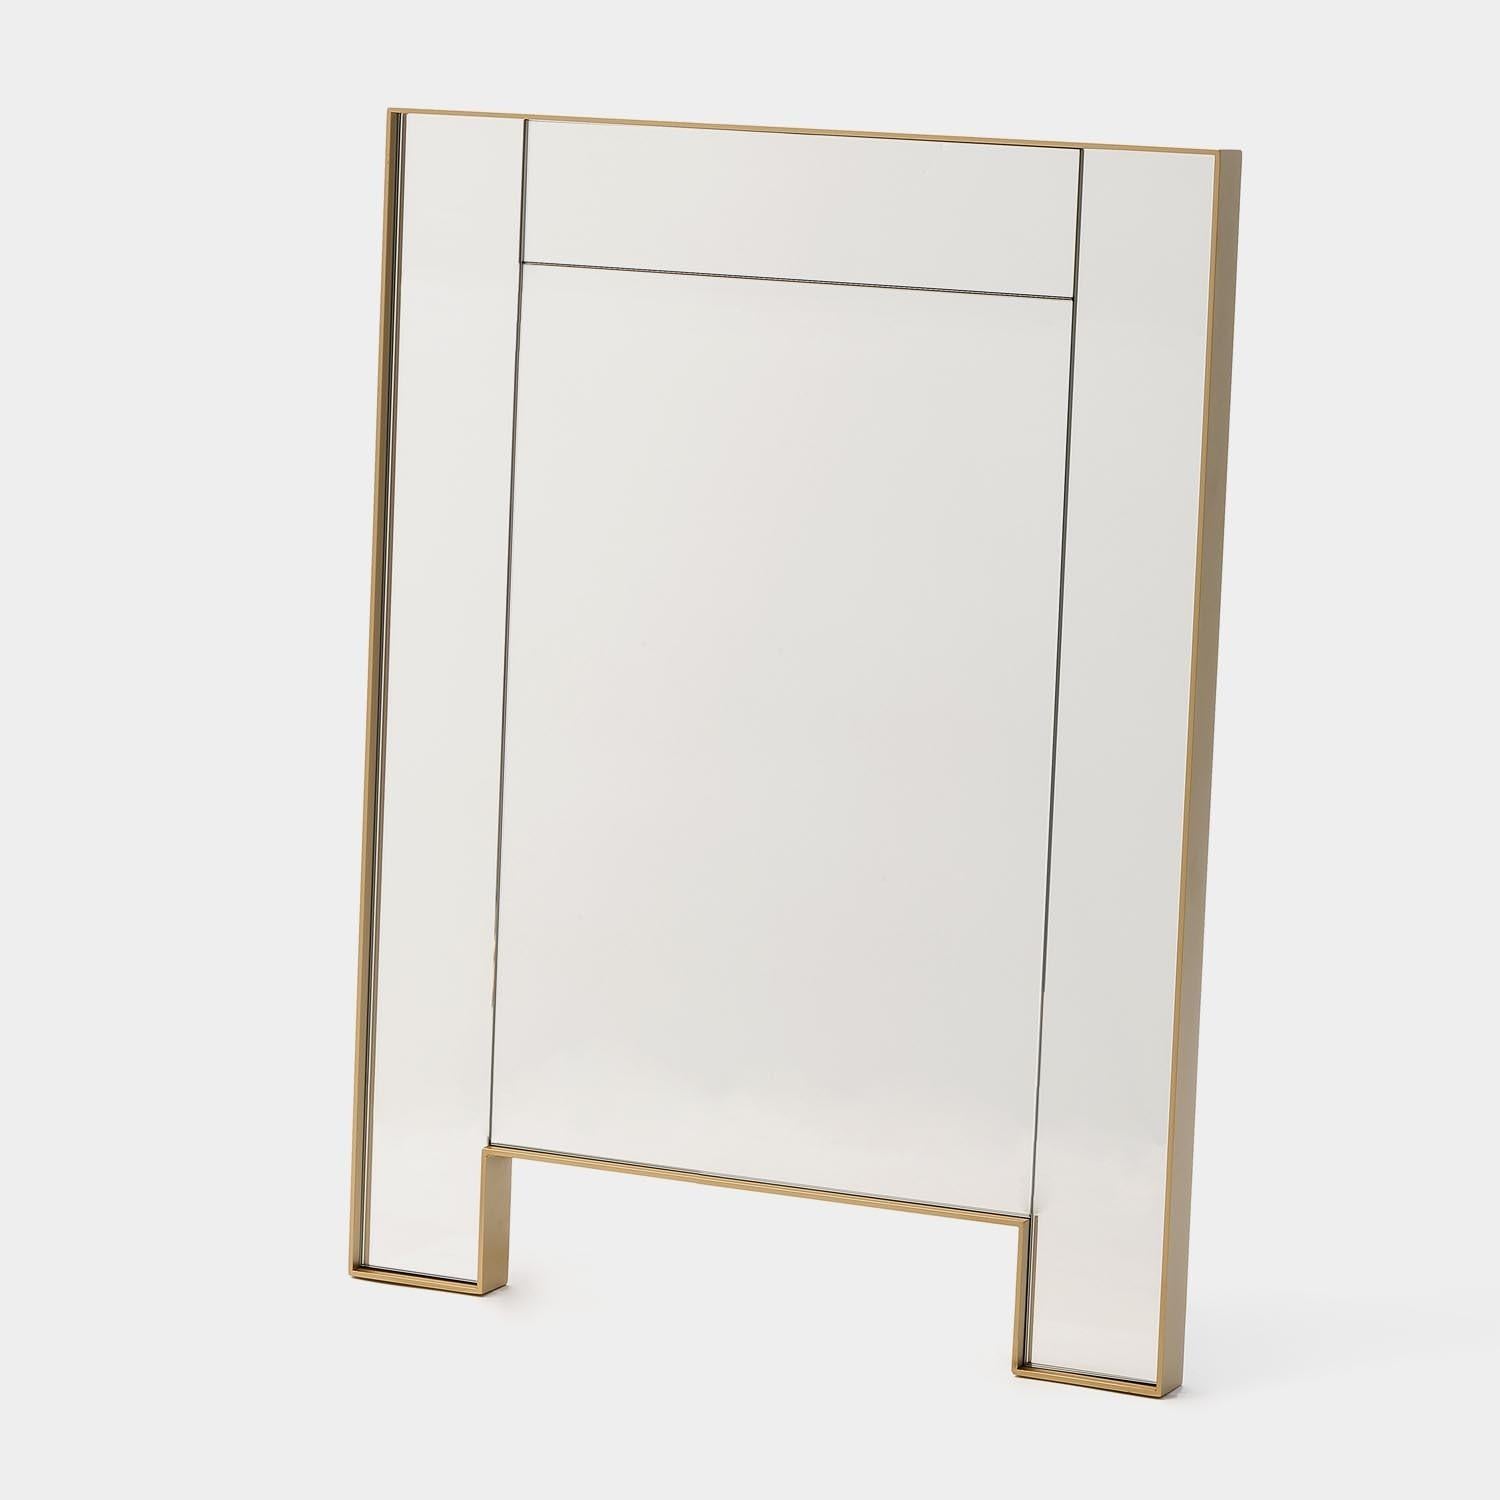 Small star wall mirror by Olivier Gagnère
Materials: Mirror to be fixed, structure in gold or bronze lacquered metal.
Technique: Lacquered metal. 
Dimensions: D 4 x W 62 x H 82.5 cm
Also available in size large. 

The Star collection by French